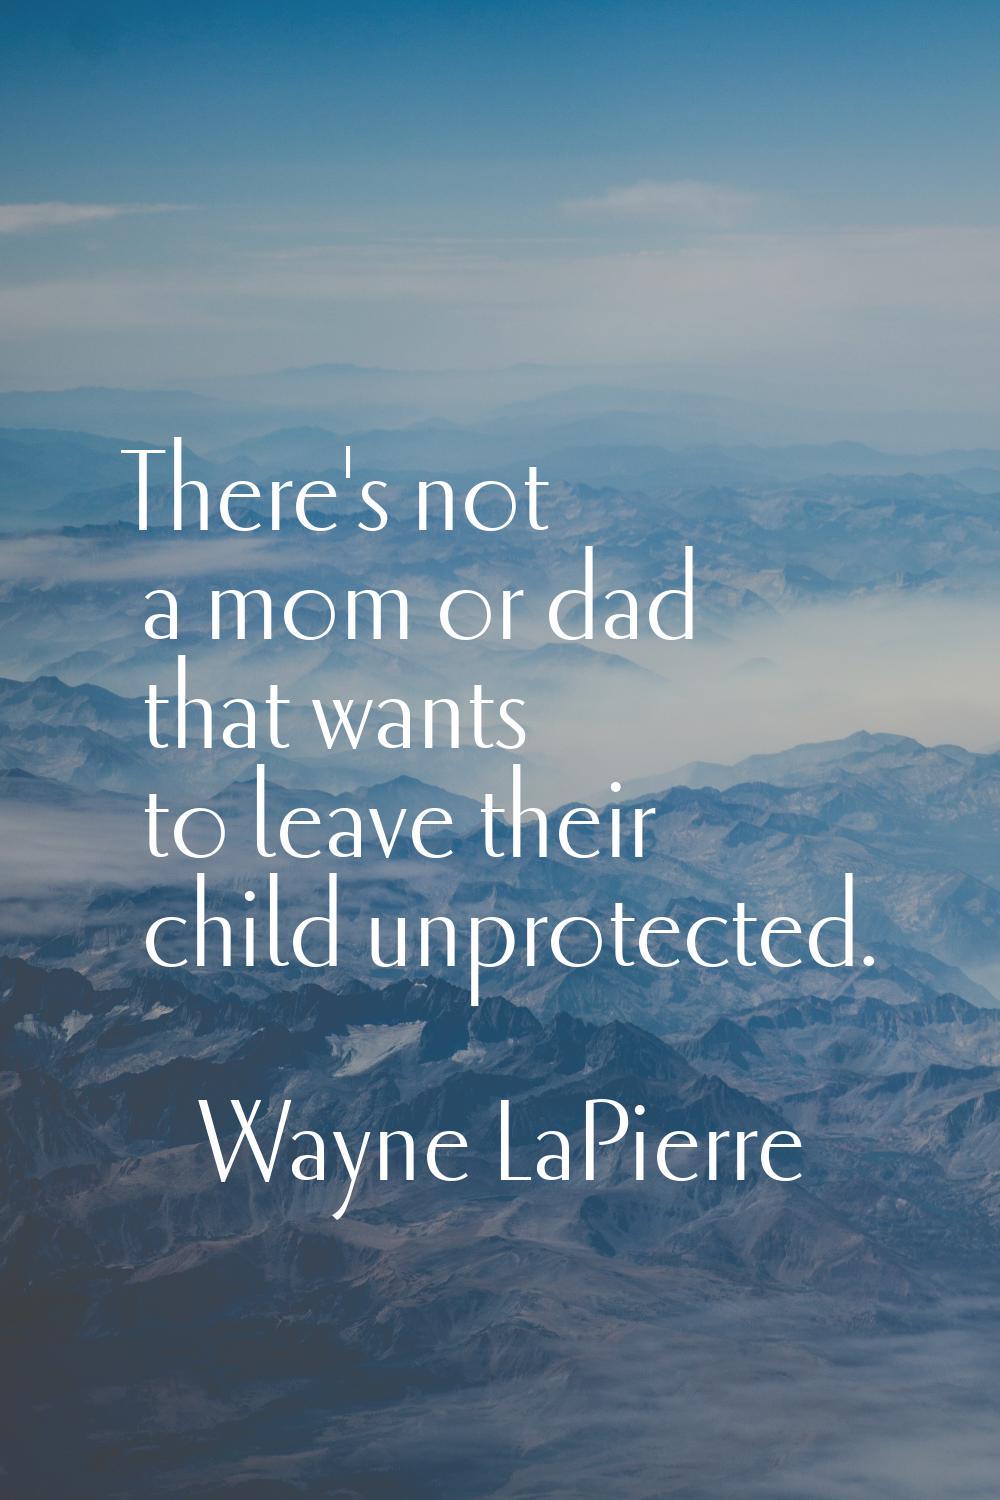 There's not a mom or dad that wants to leave their child unprotected.